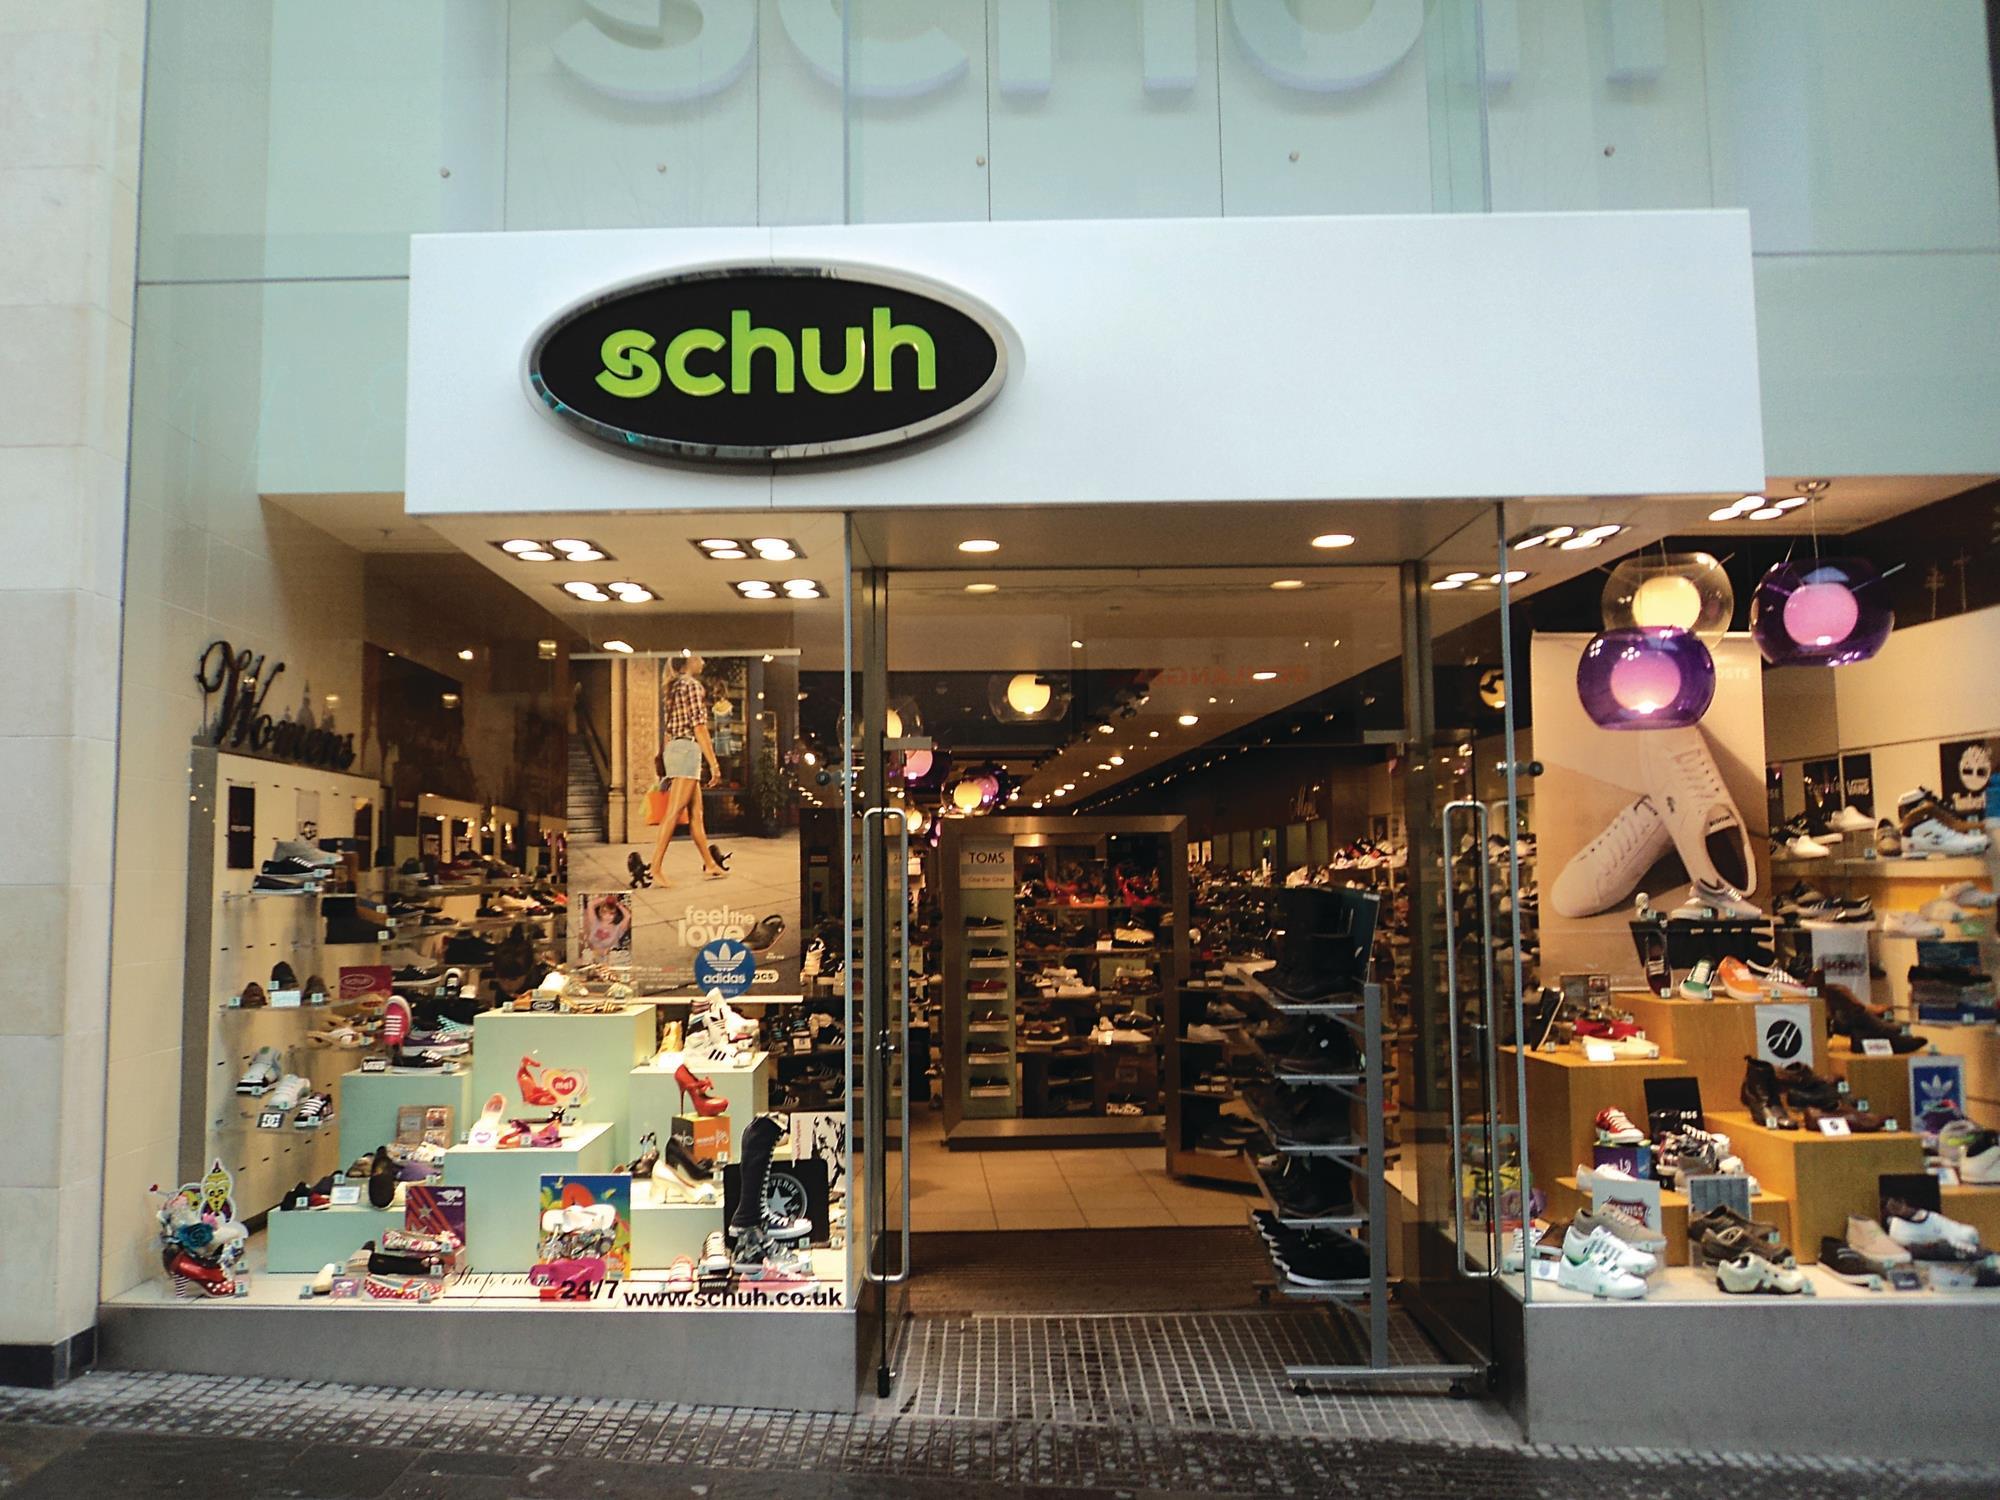 Schuh partners with Google on location-based real world mobile game ...